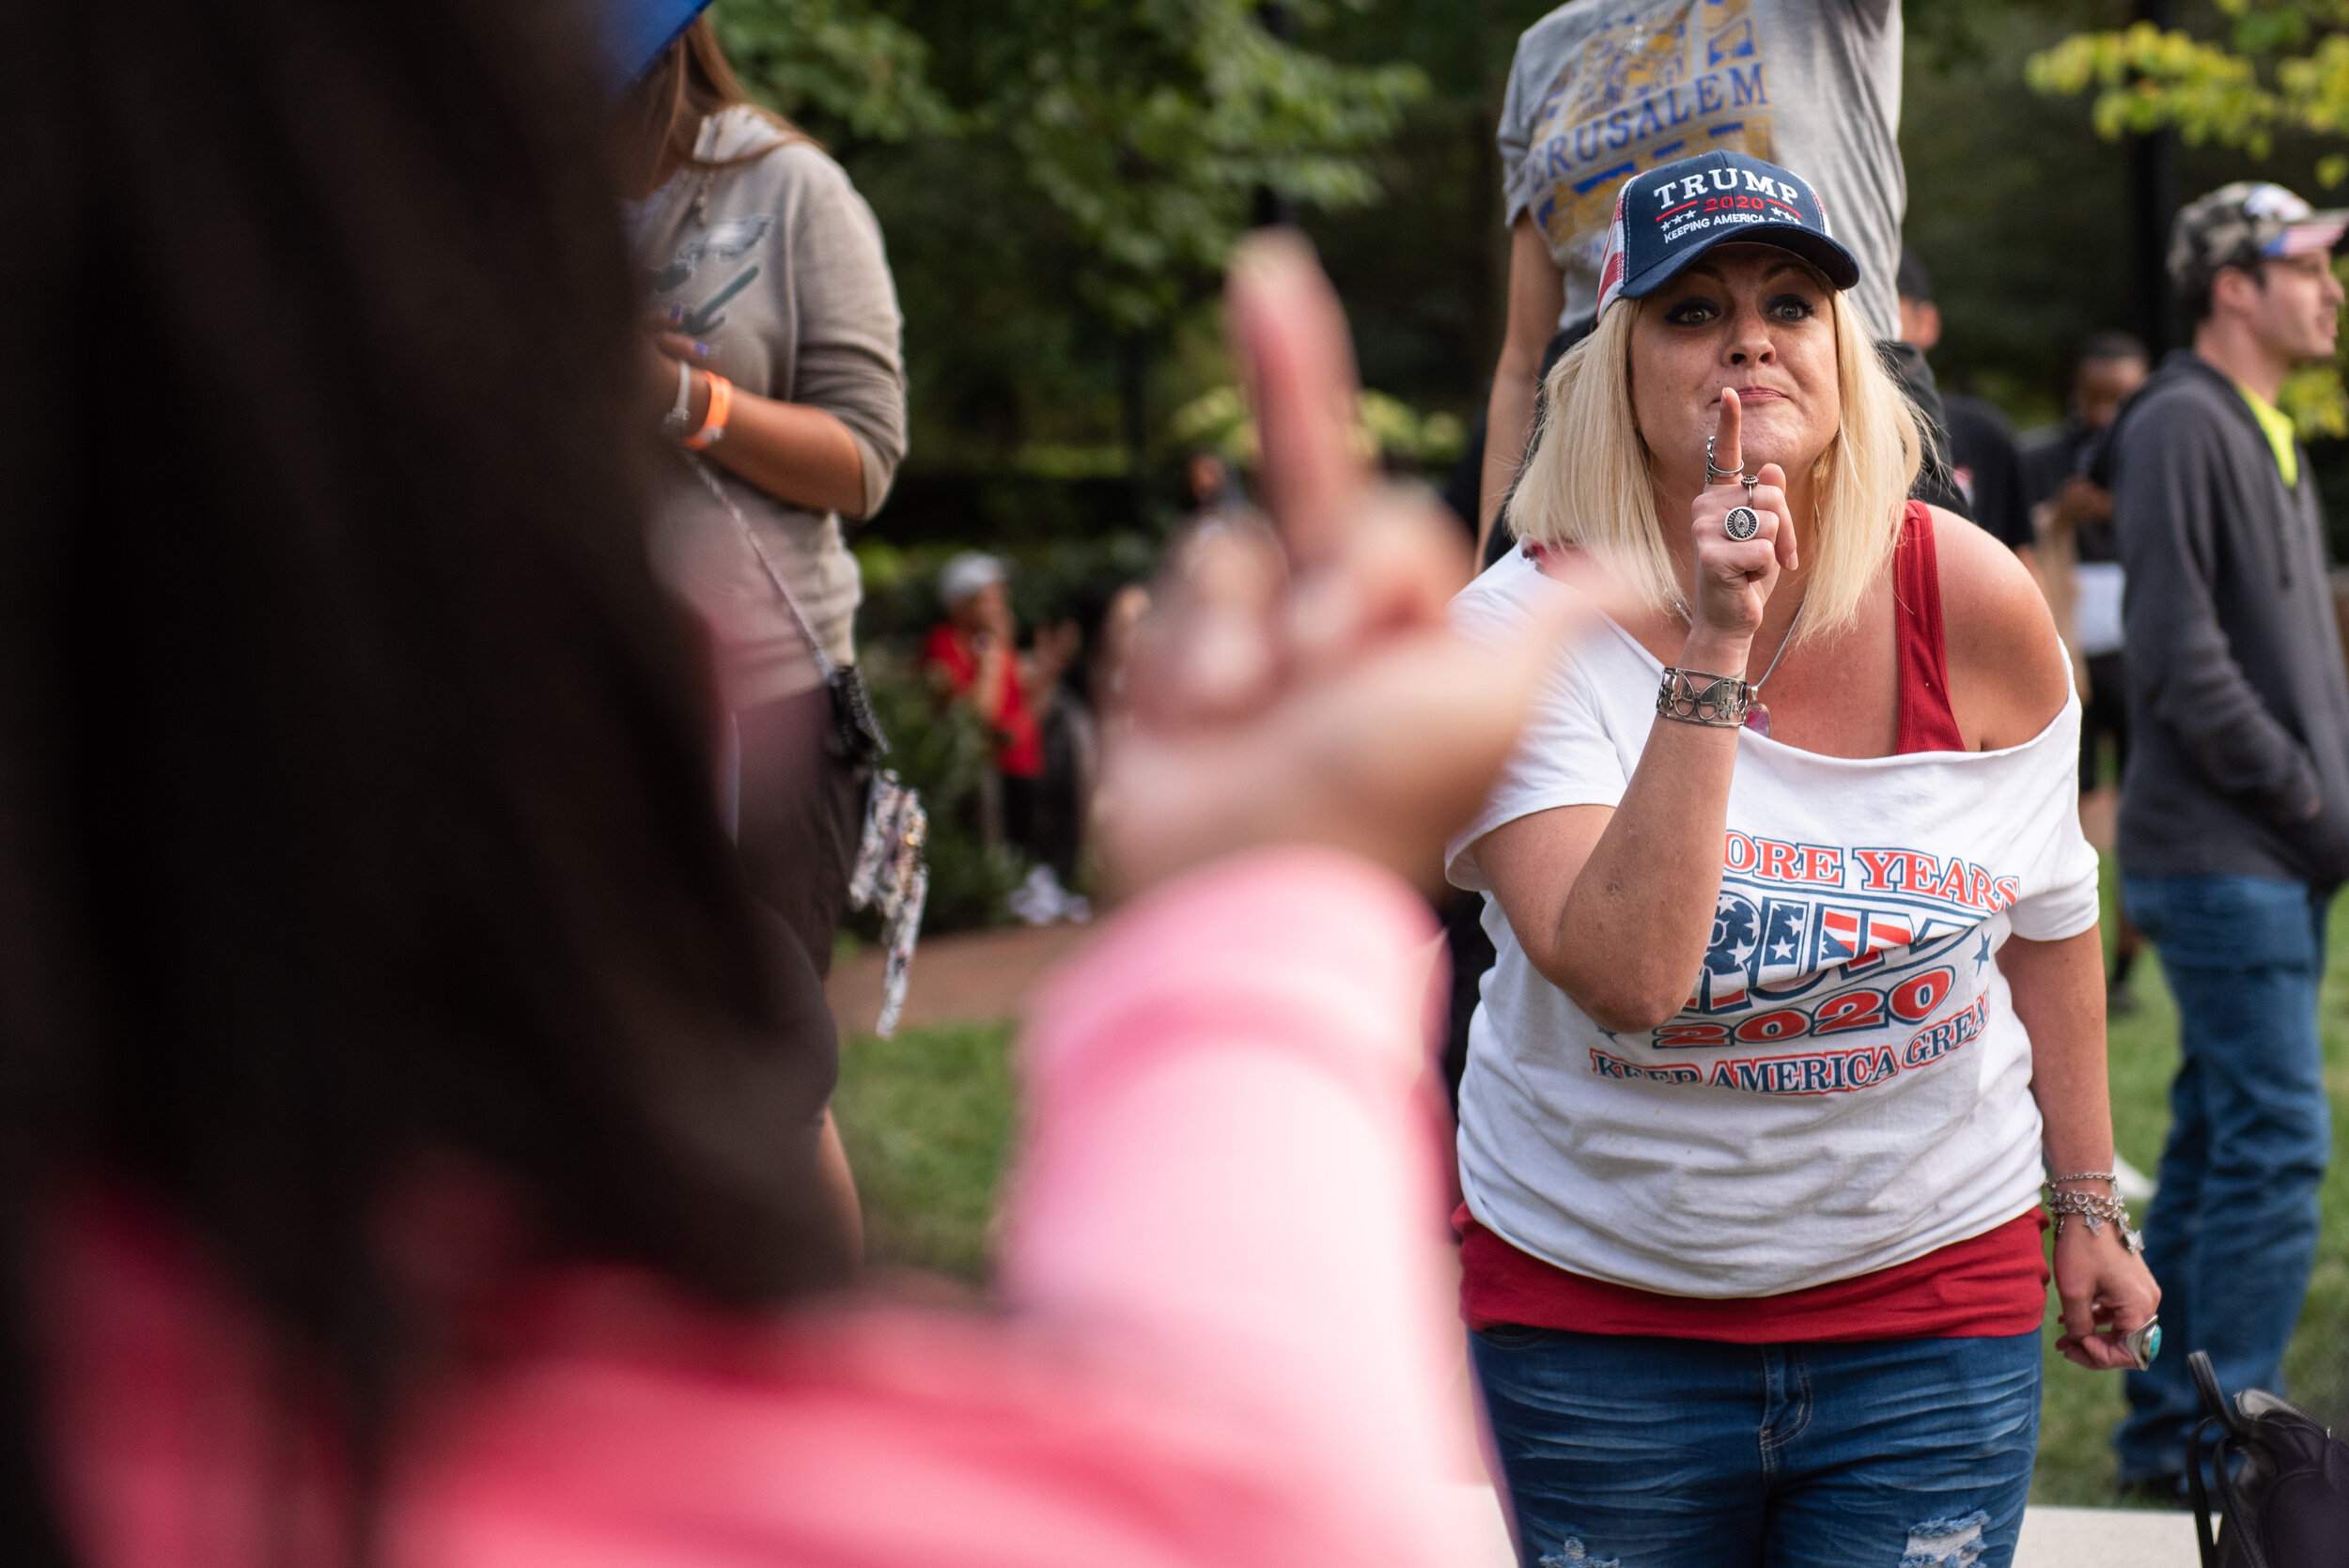   A person raises their middle finger at a Trump supporter as they confront protesters on Sept. 15, 2021. Protesters and counter-protesters gathered outside the Constitution Center in Philadelphia where President Donald Trump held a townhall.   